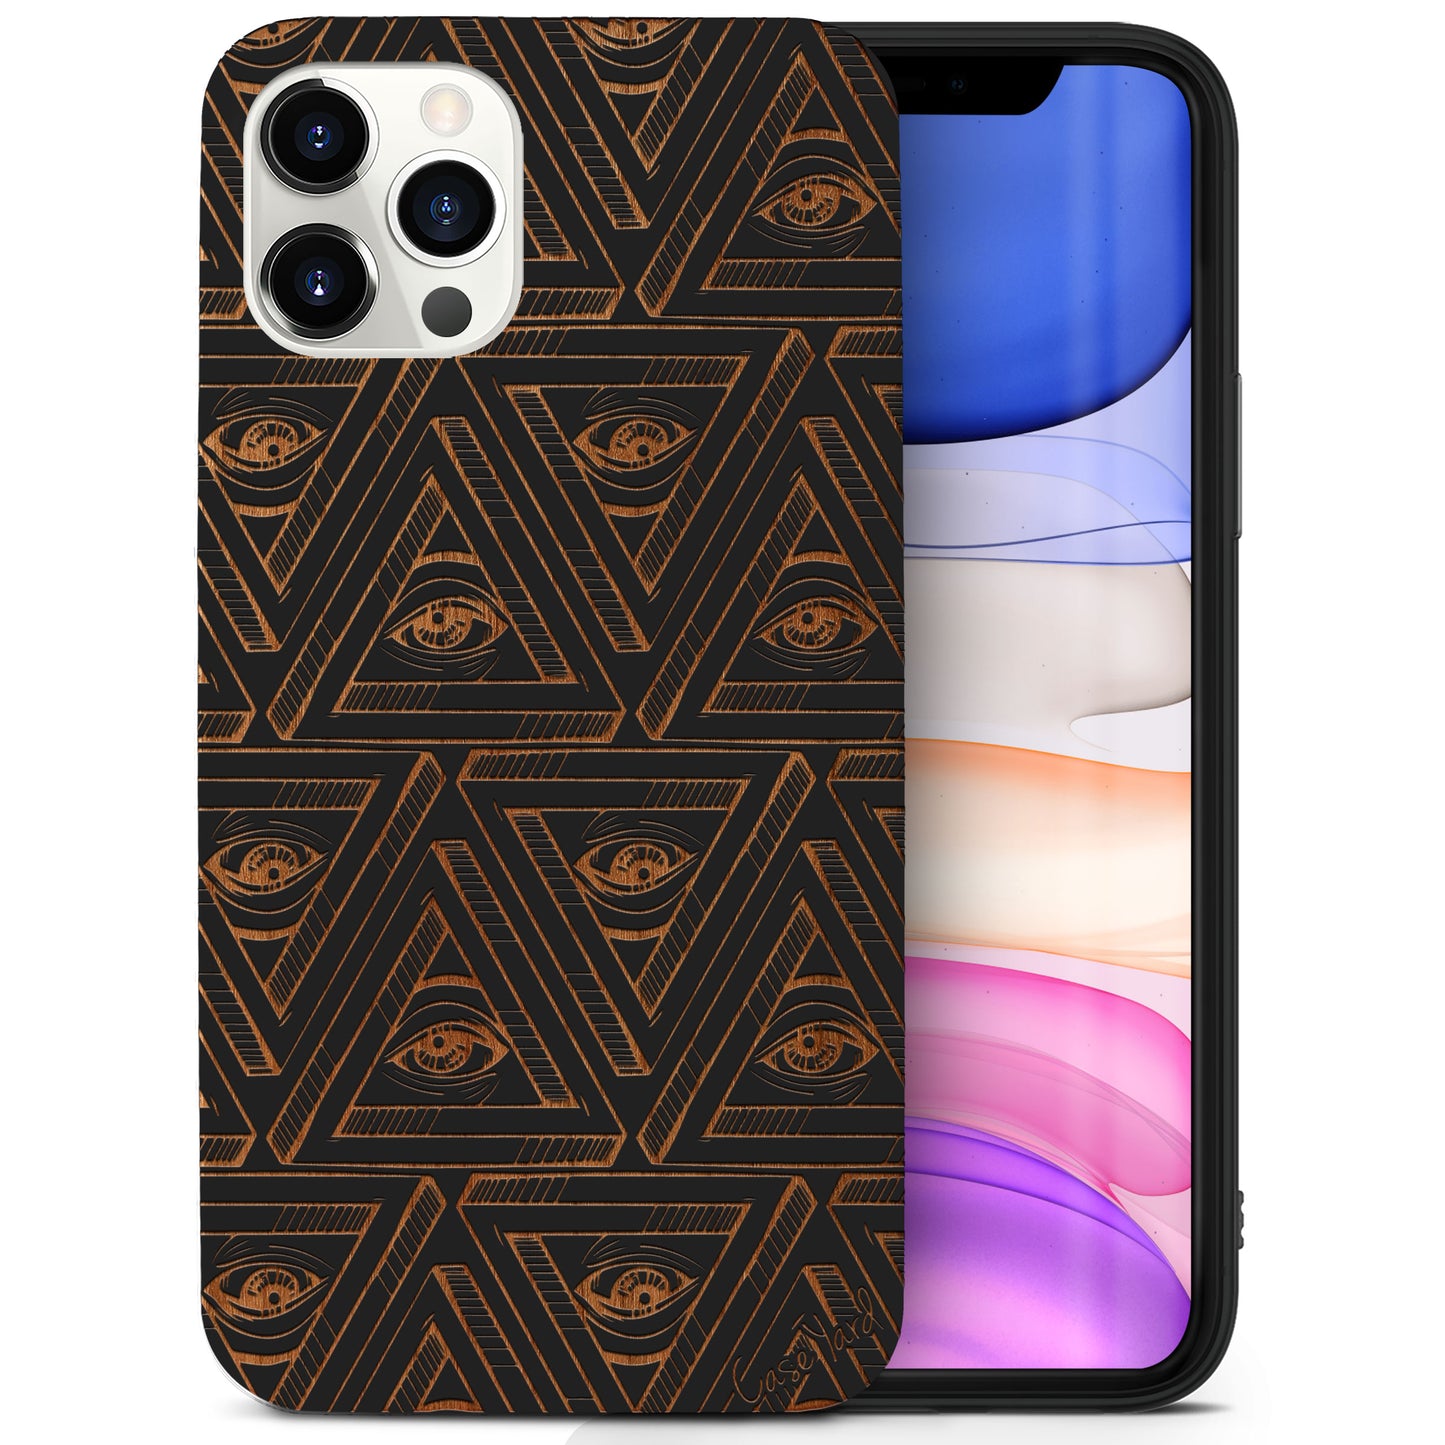 Wooden Cell Phone Case Cover, Laser Engraved case for iPhone & Samsung phone All Seeing Eyes Pattern Wood Design